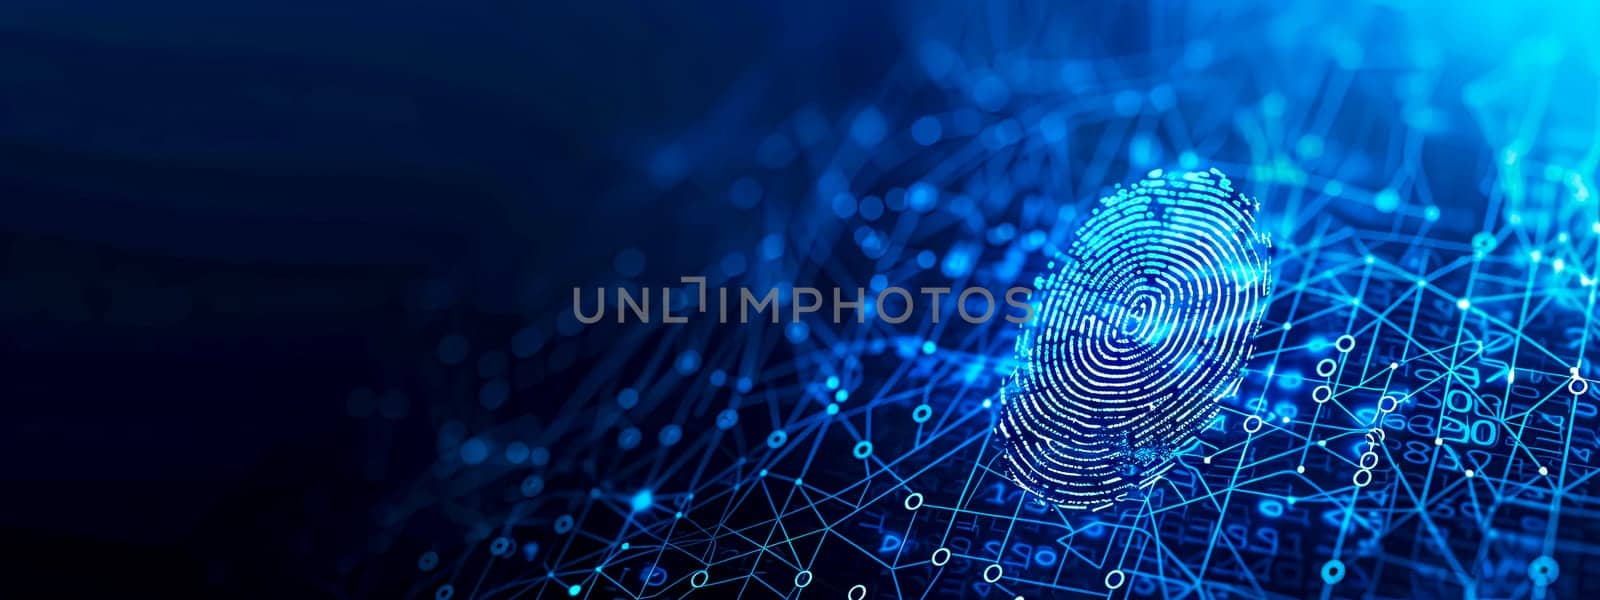 Blue Cybersecurity Fingerprint Network for Digital Biometric Authentication and Data Protection by Edophoto